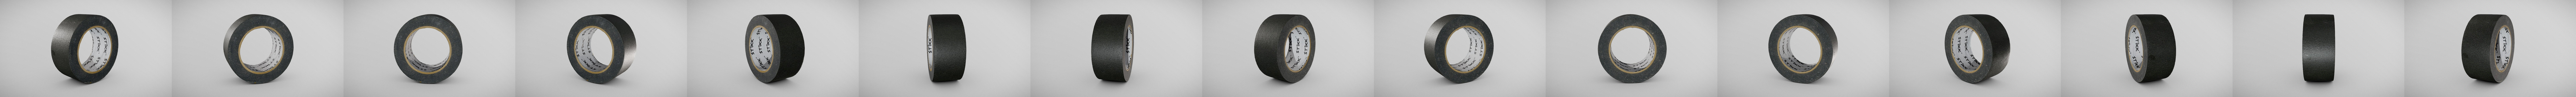 Black Painters Tape - Download Free 3D model by inciprocal